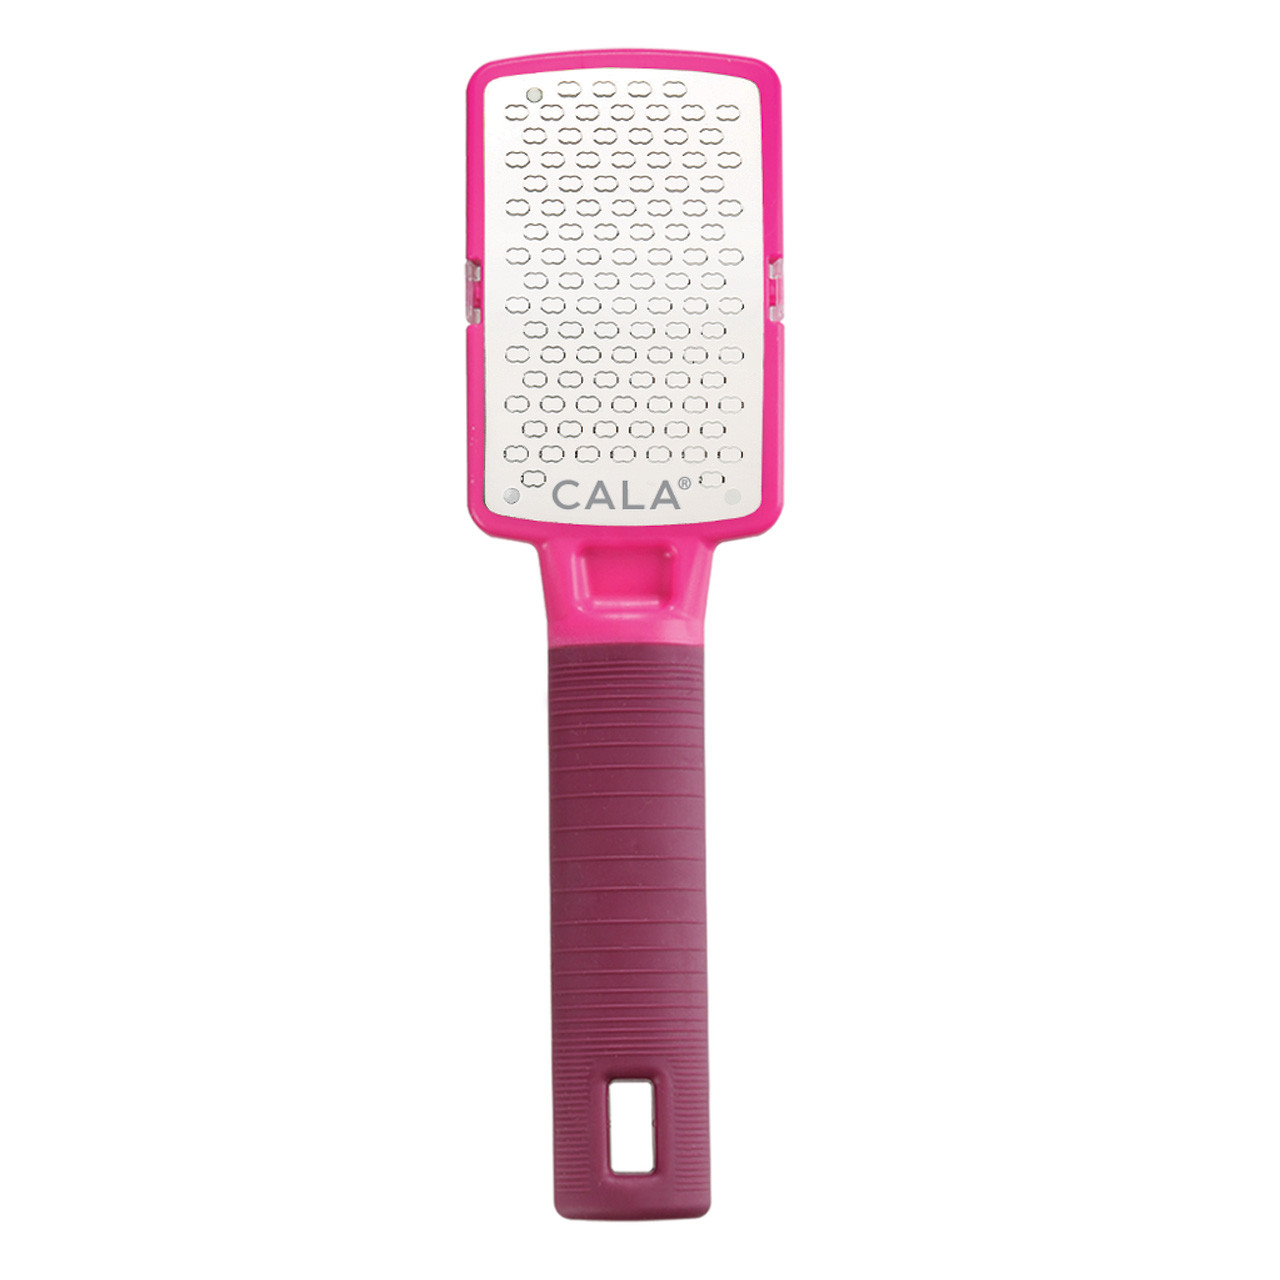 Silky Glide Pro Callus Remover (Hot Pink), Get Smooth Skin